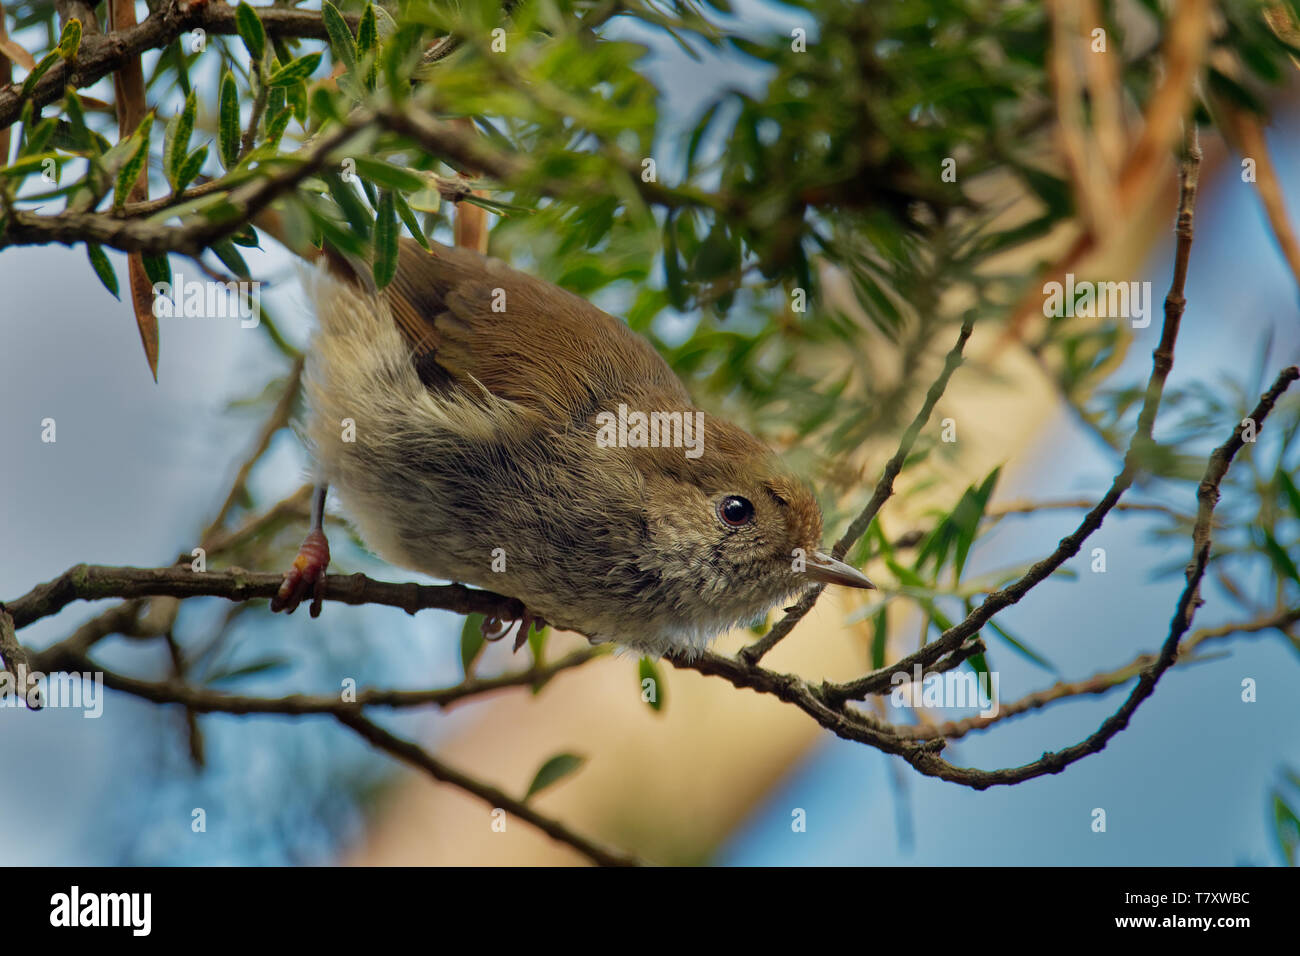 Tasmanian Thornbill - Acanthiza ewingii - small brown bird only found in Tasmania and the islands in the Bass Strait, common bird in these regions, fo Stock Photo